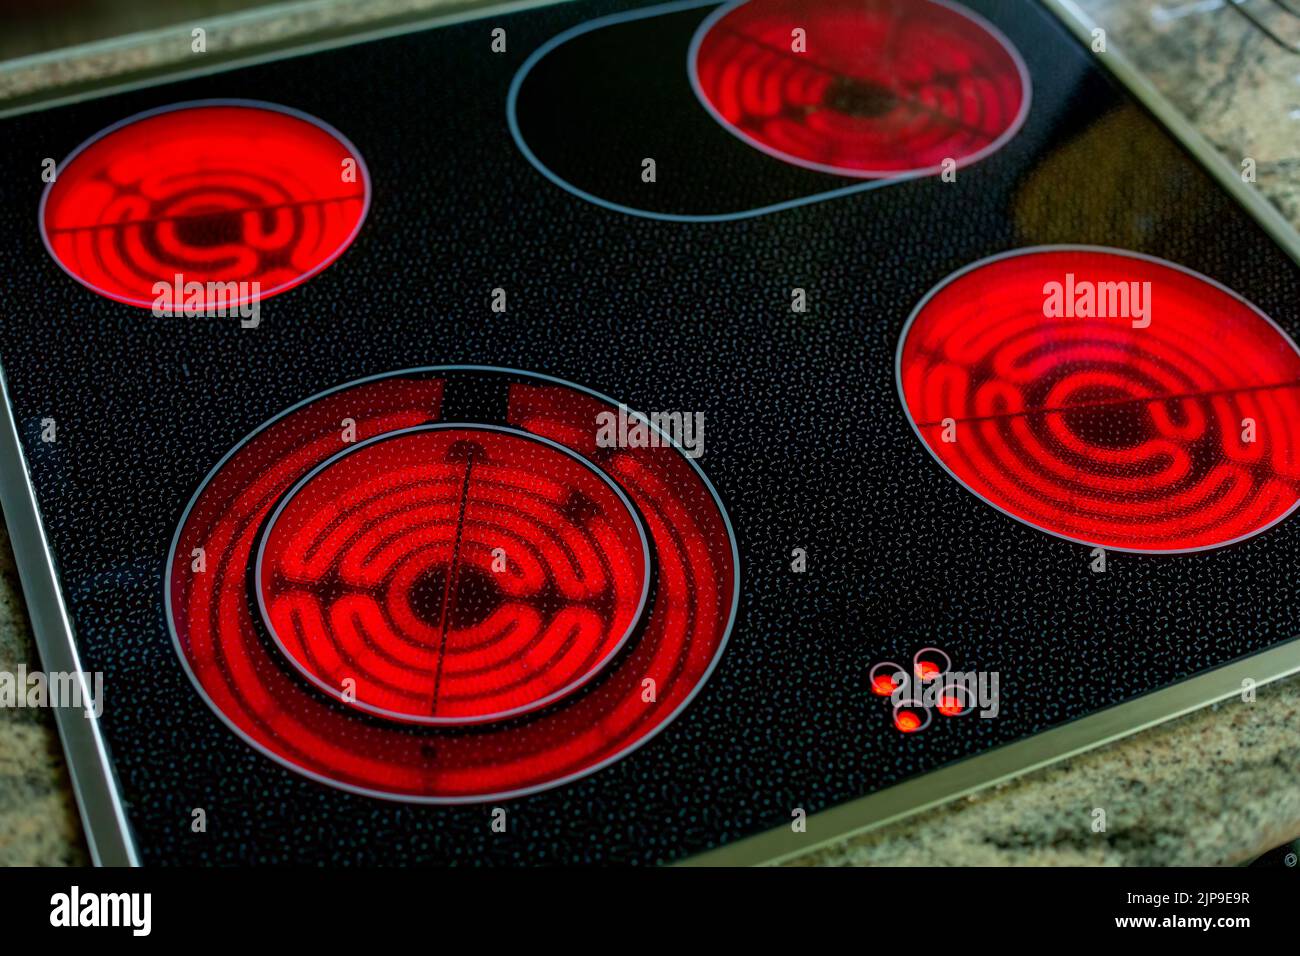 close-up of round red glowing induction stove Stock Photo